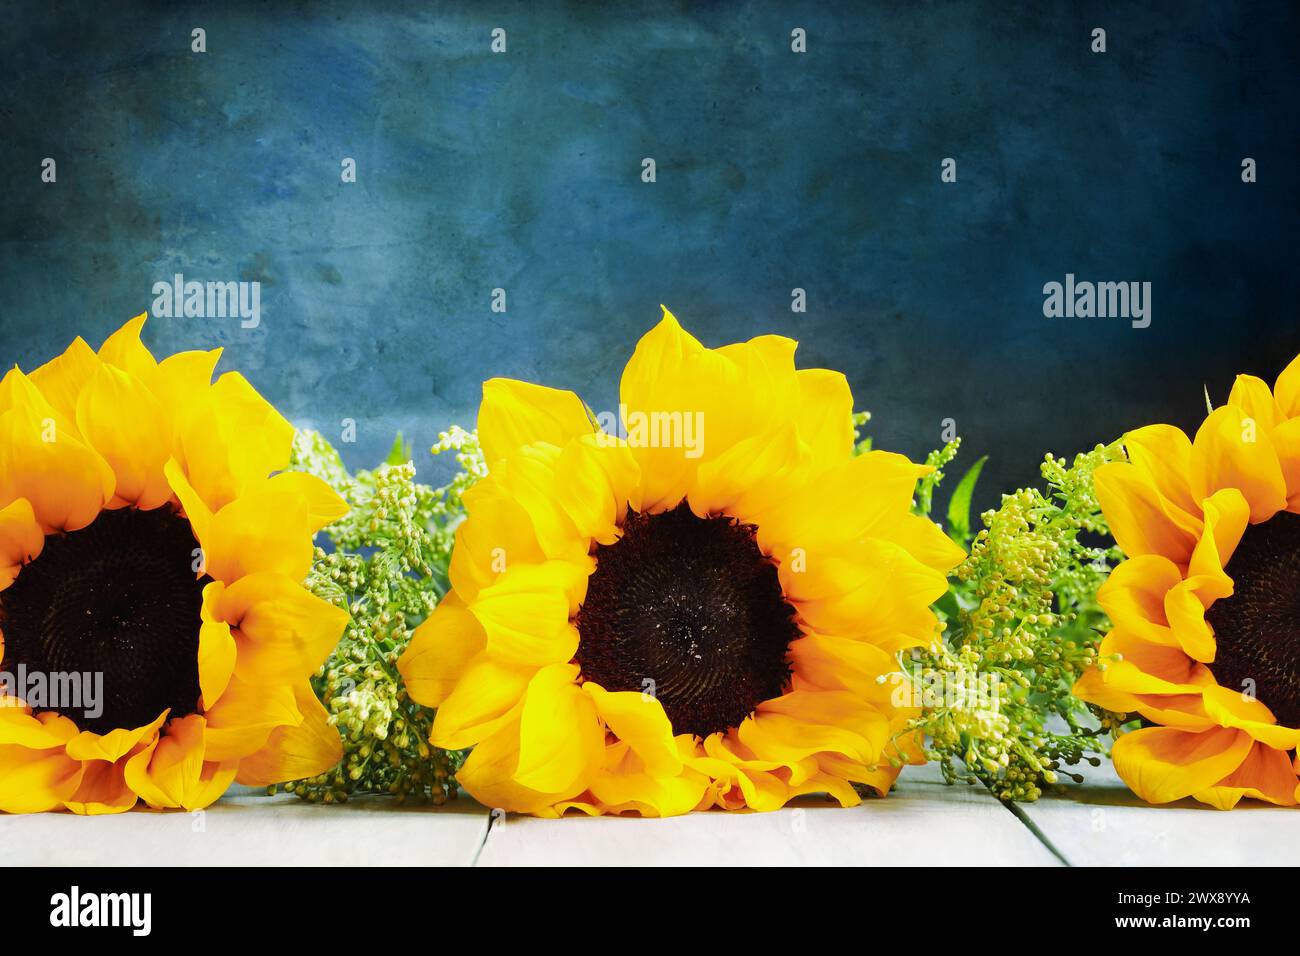 Three large beautiful sunflowers against a blue painterly background with copy space. Front view. Stock Photo